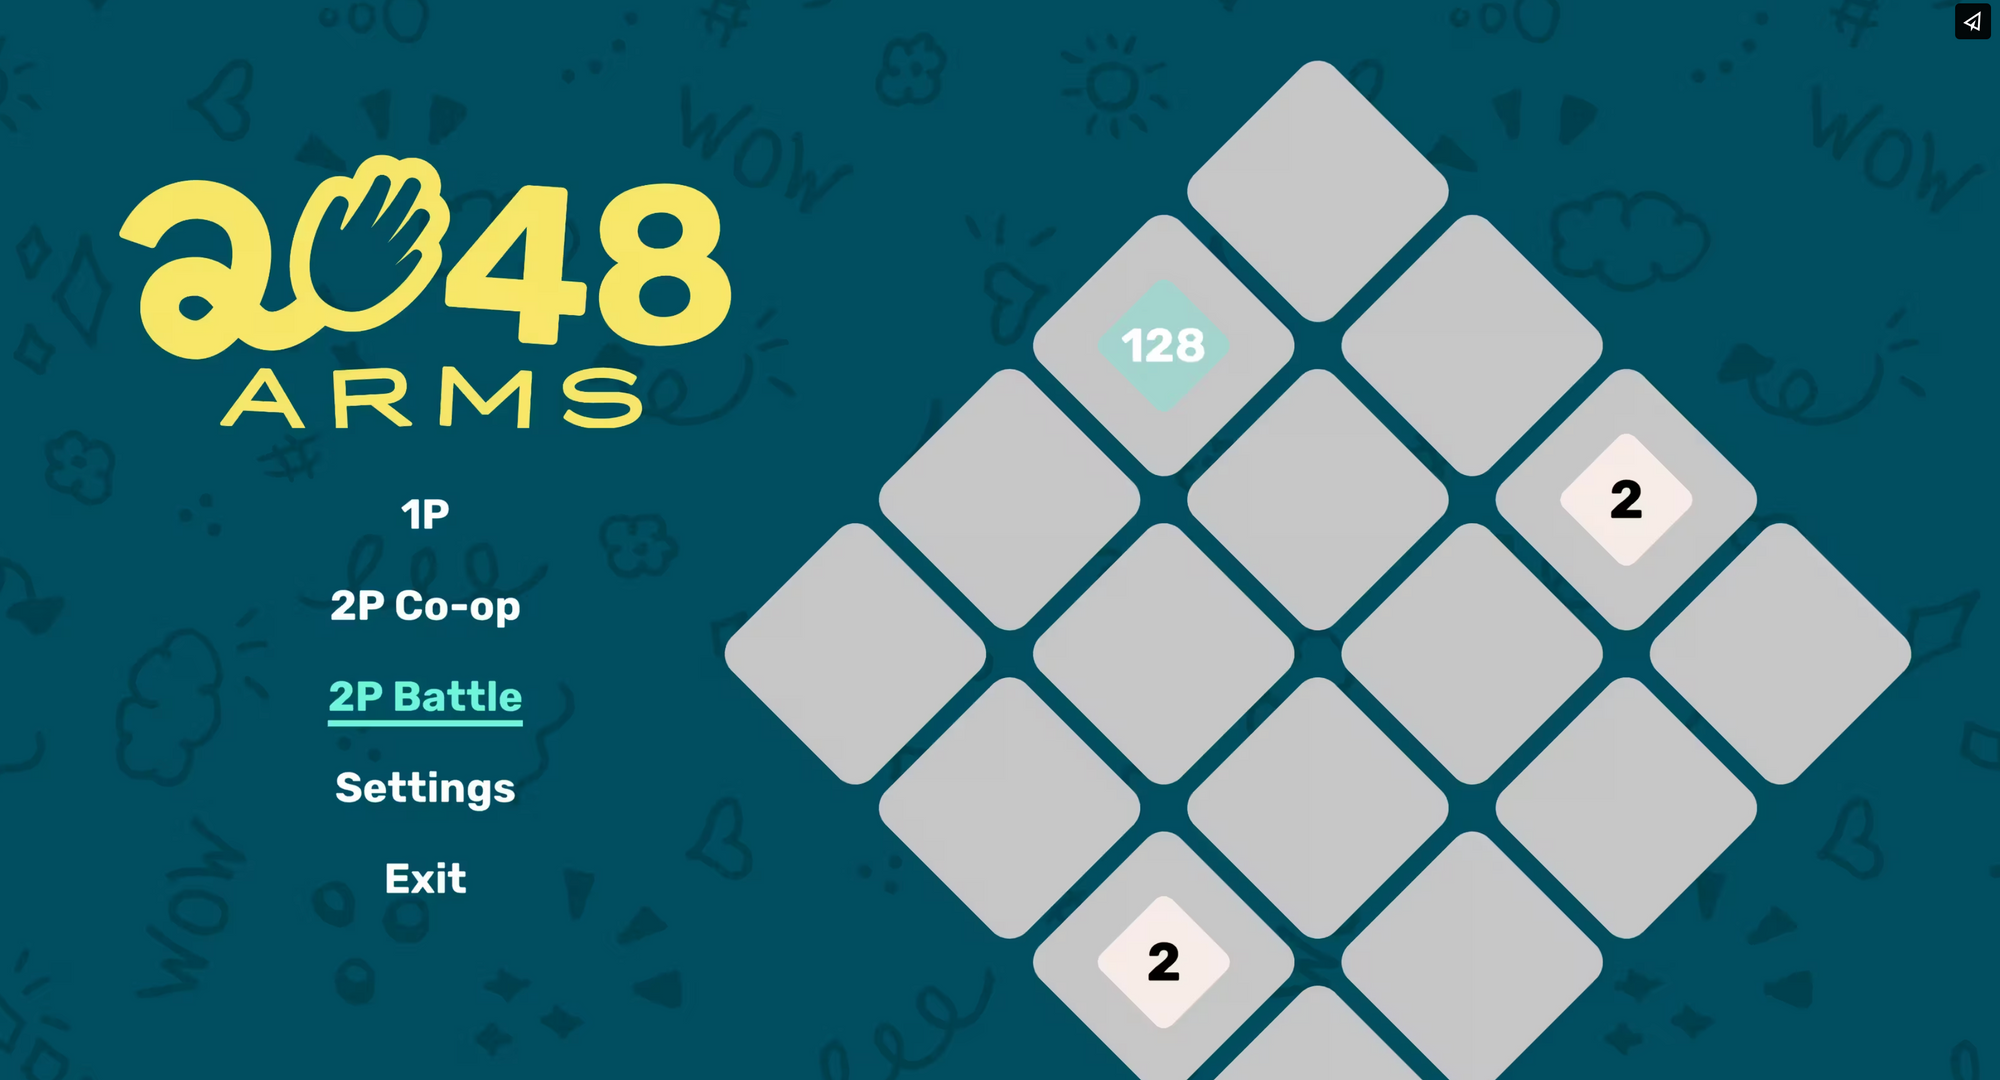 Announcing 2048 Arms!